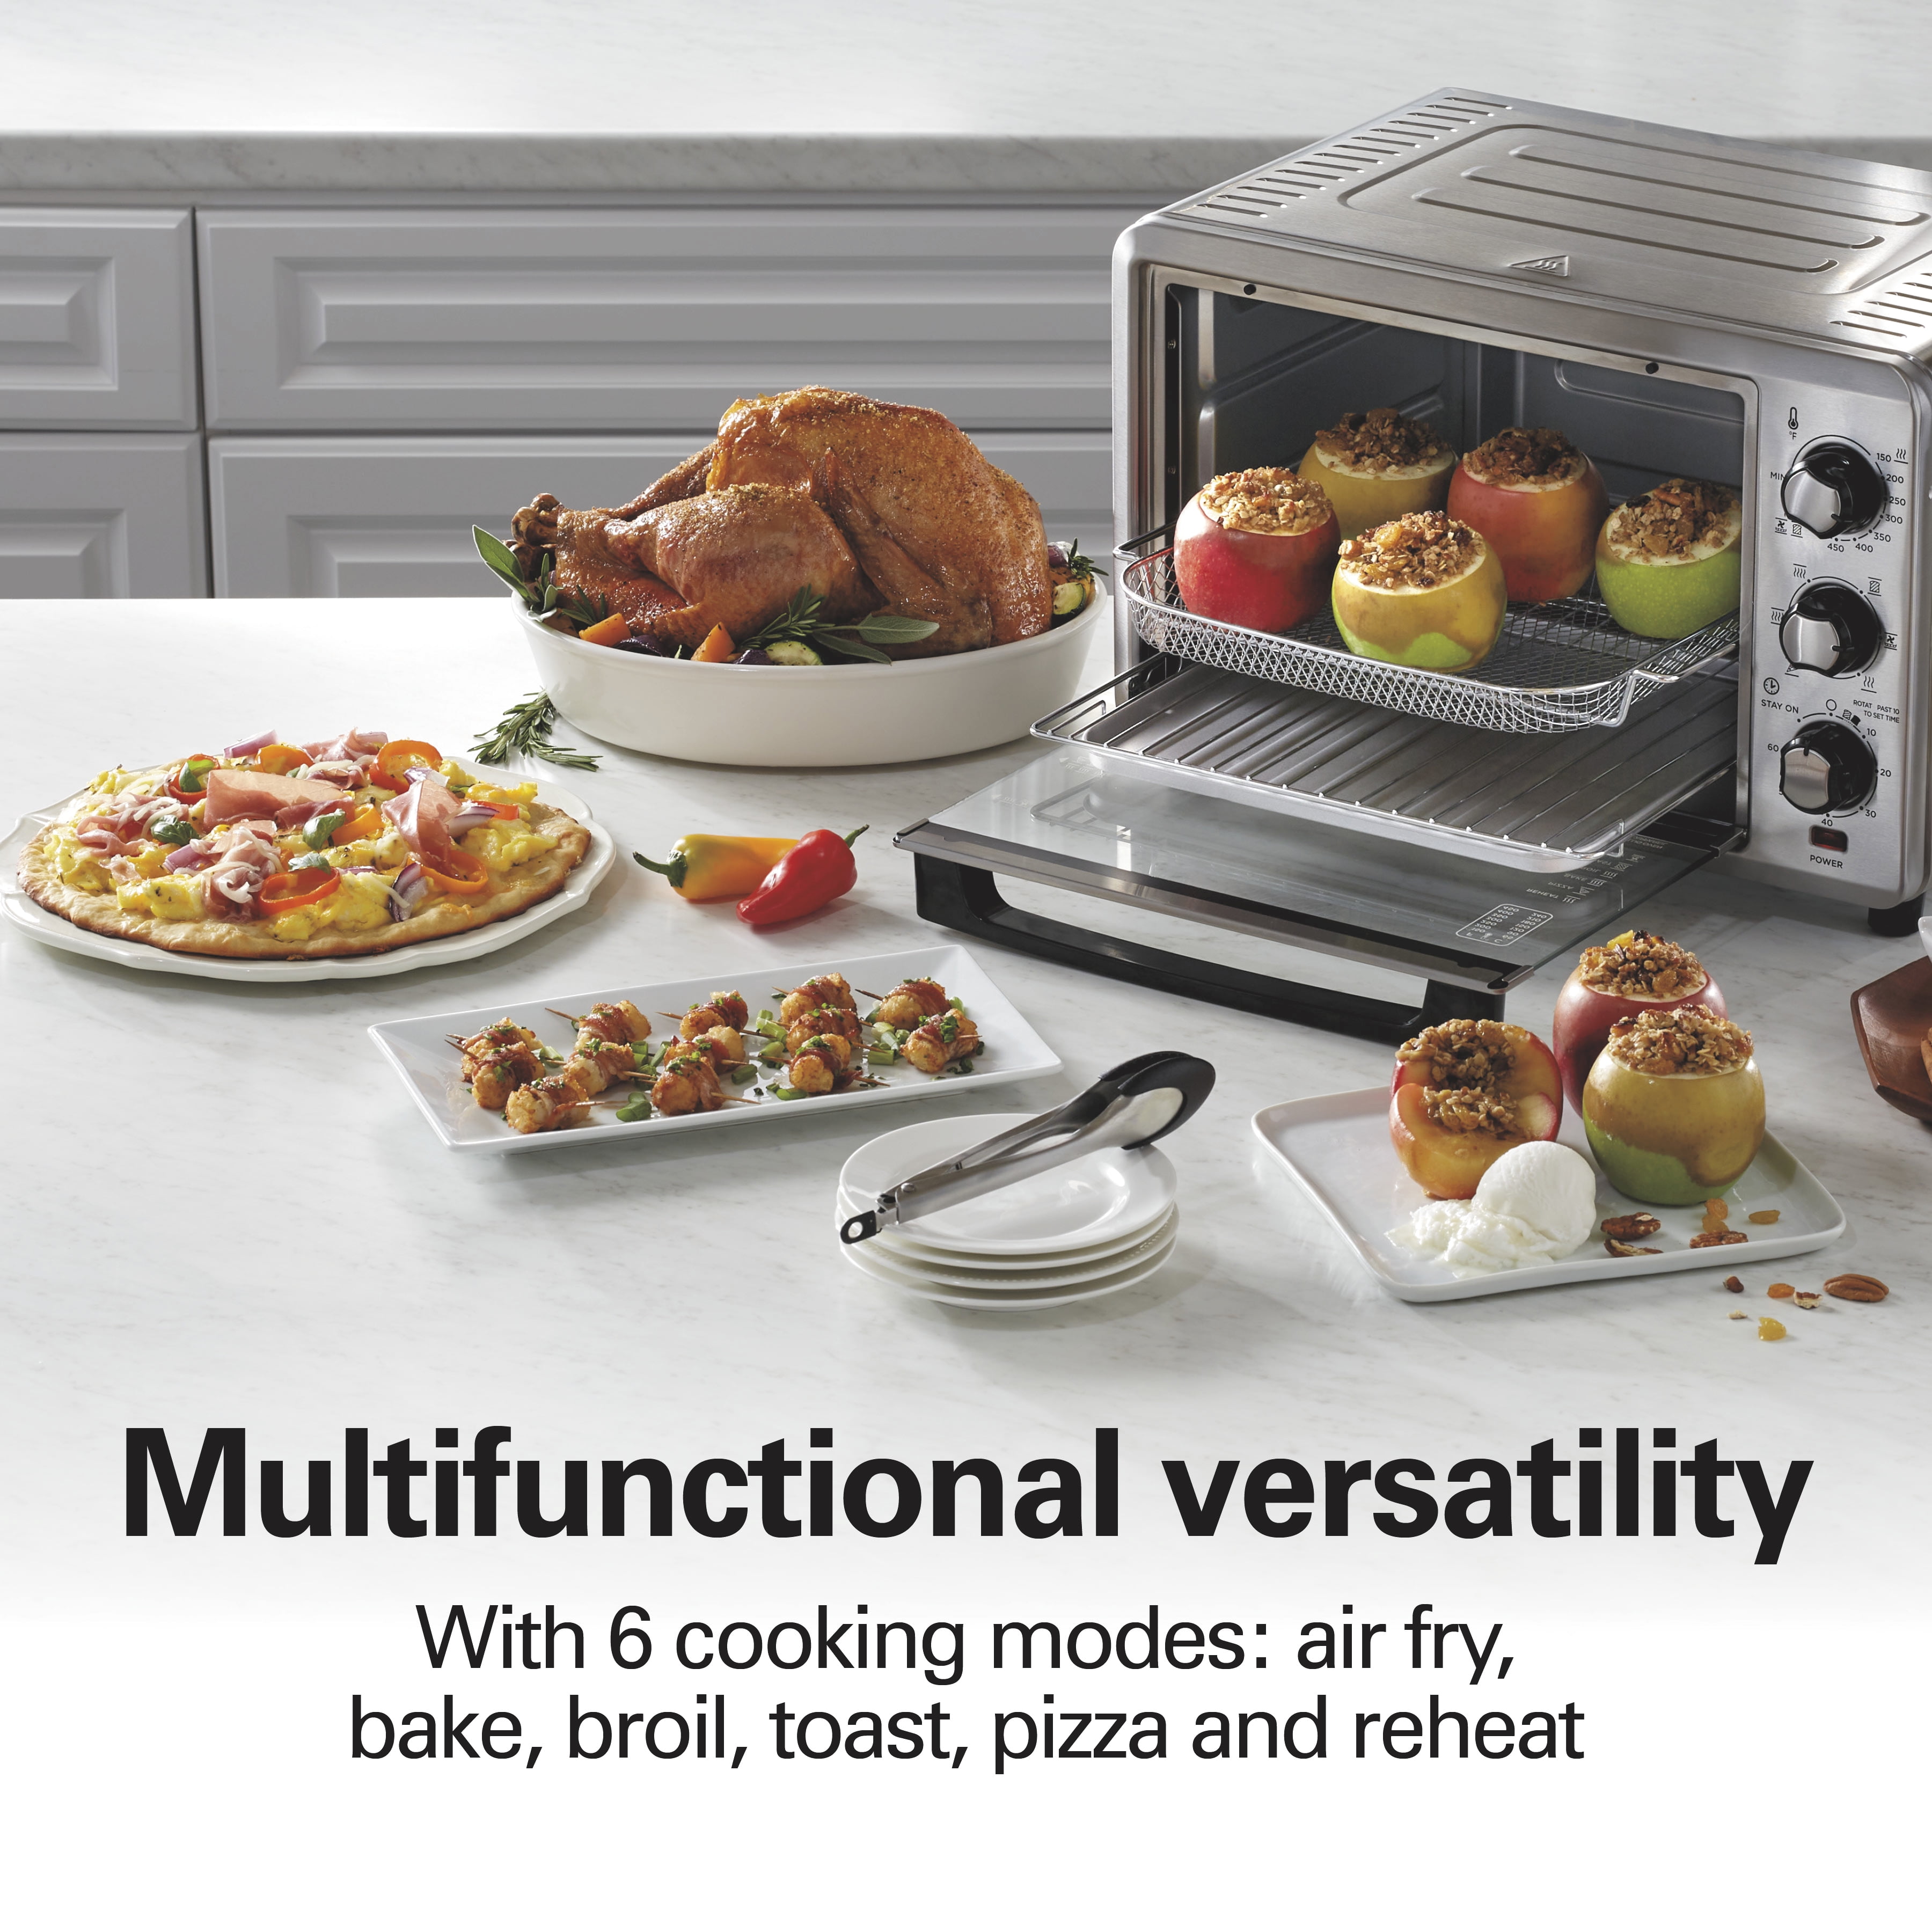 Hamilton Beach 1400 W 6-Slice Stainless Steel Toaster Oven with Quantum Air Fry Technology, Silver